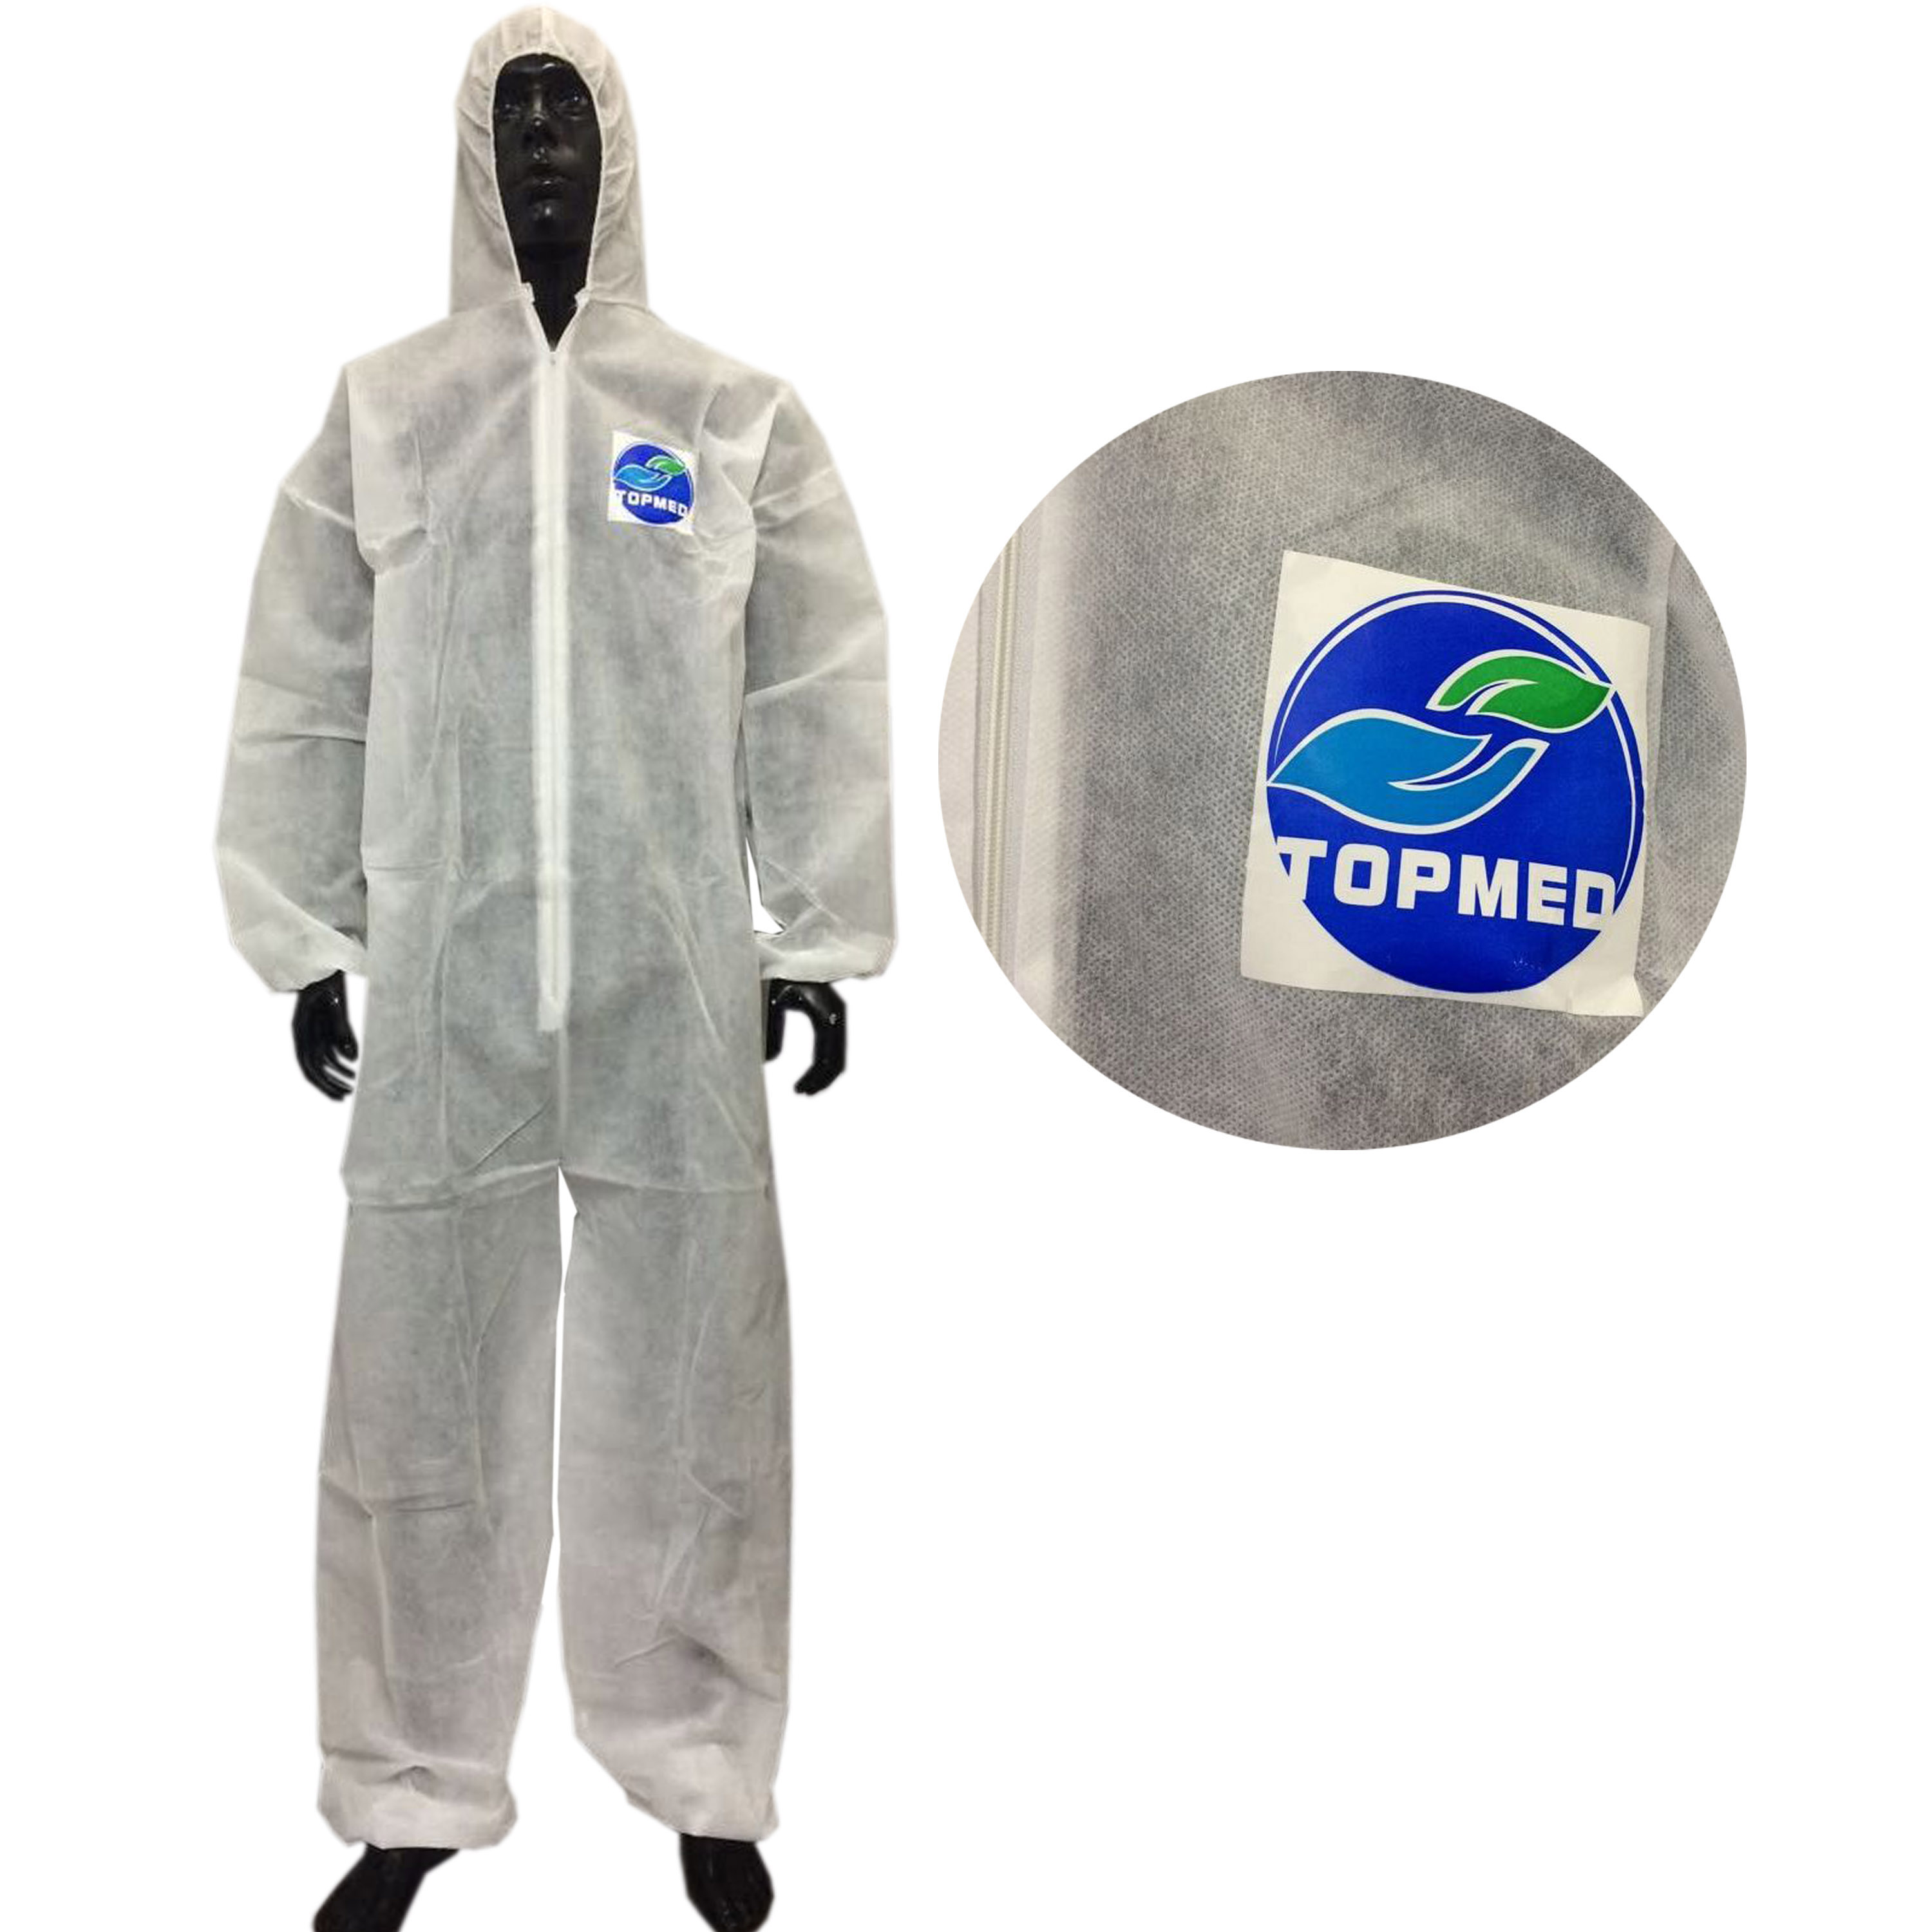 TOPMED Coverall 